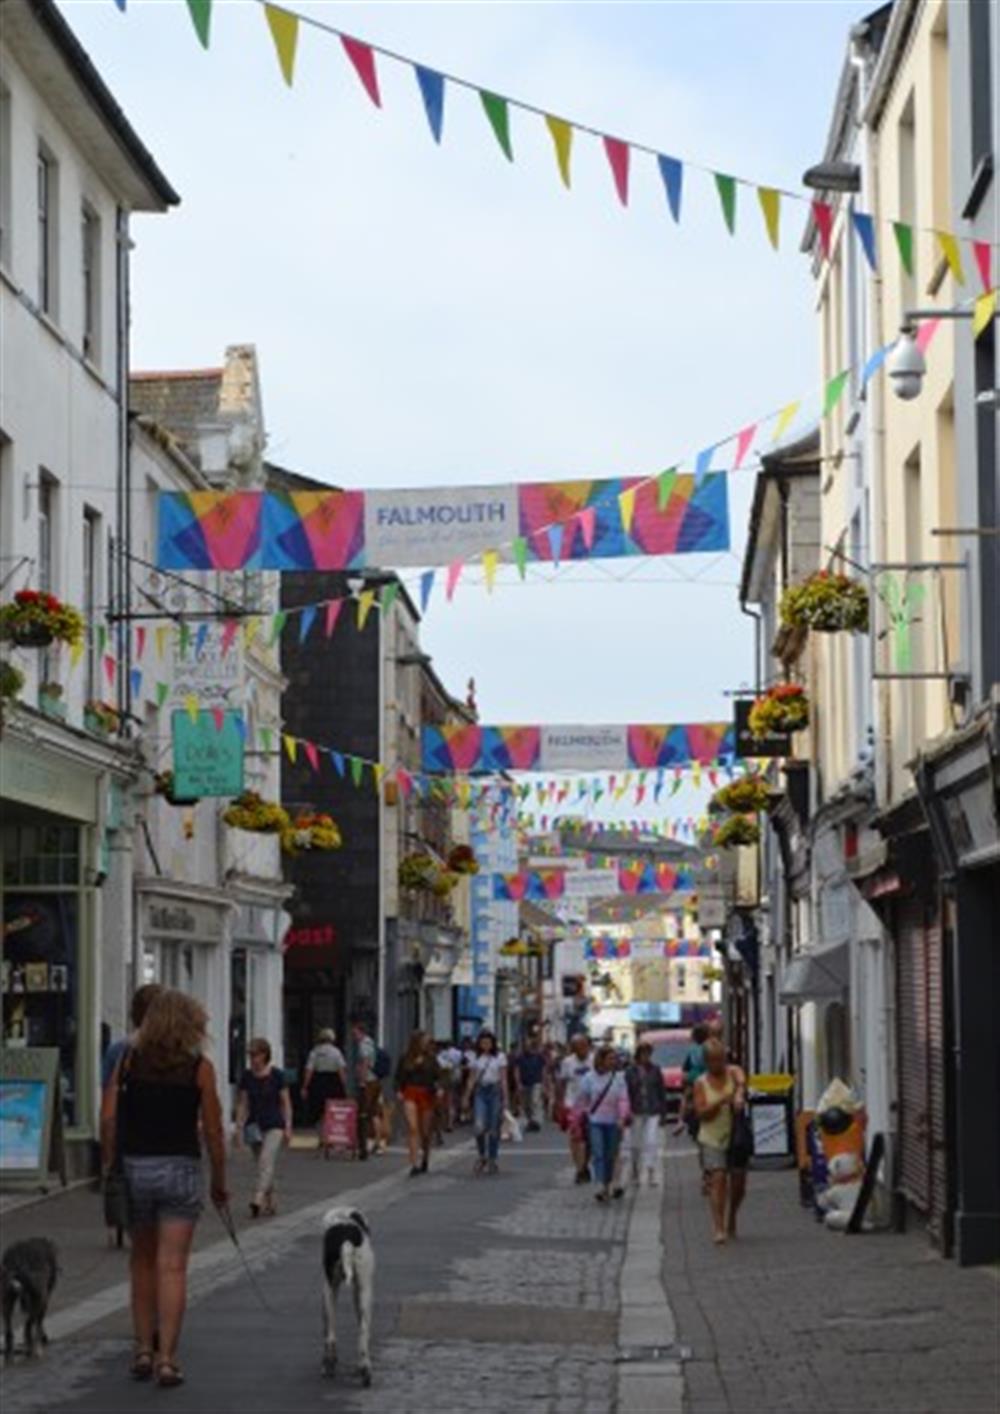 Falmouth town, with its range of shops.